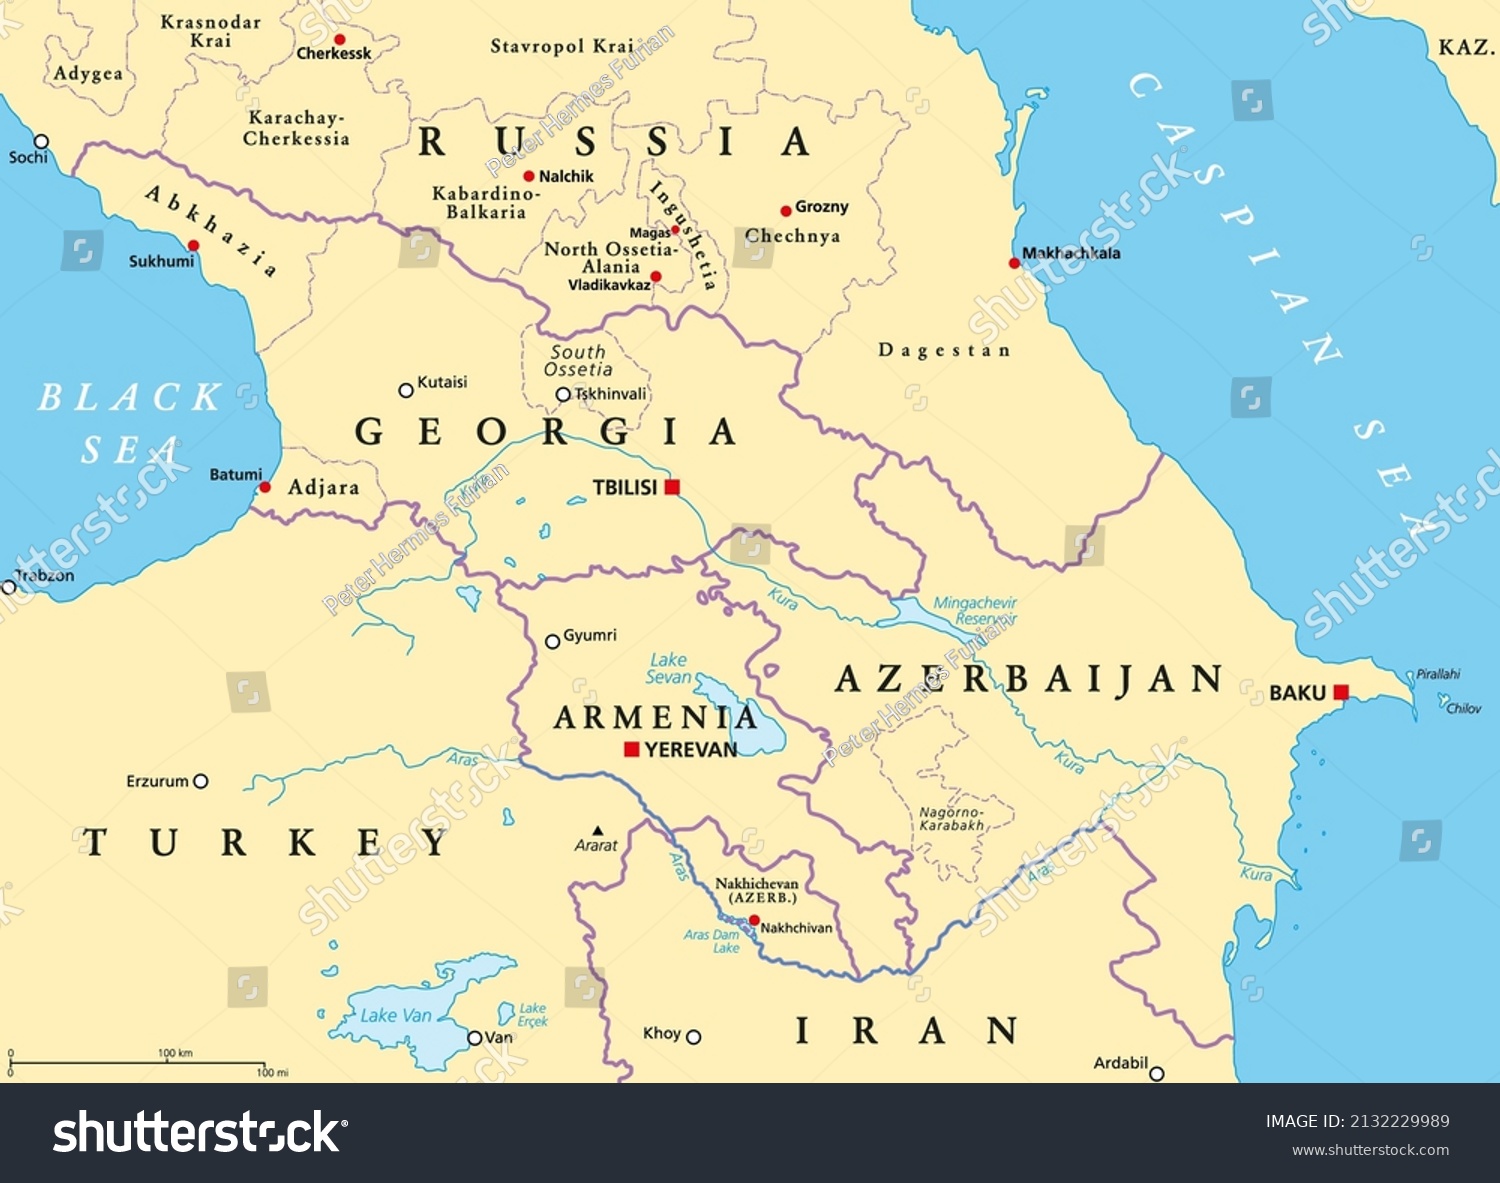 SVG of The Caucasus, or Caucasia, political map. A region between the Black Sea and the Caspian Sea, mainly occupied by Armenia, Azerbaijan, Georgia, and parts of Southern Russia, with disputed areas. Vector svg